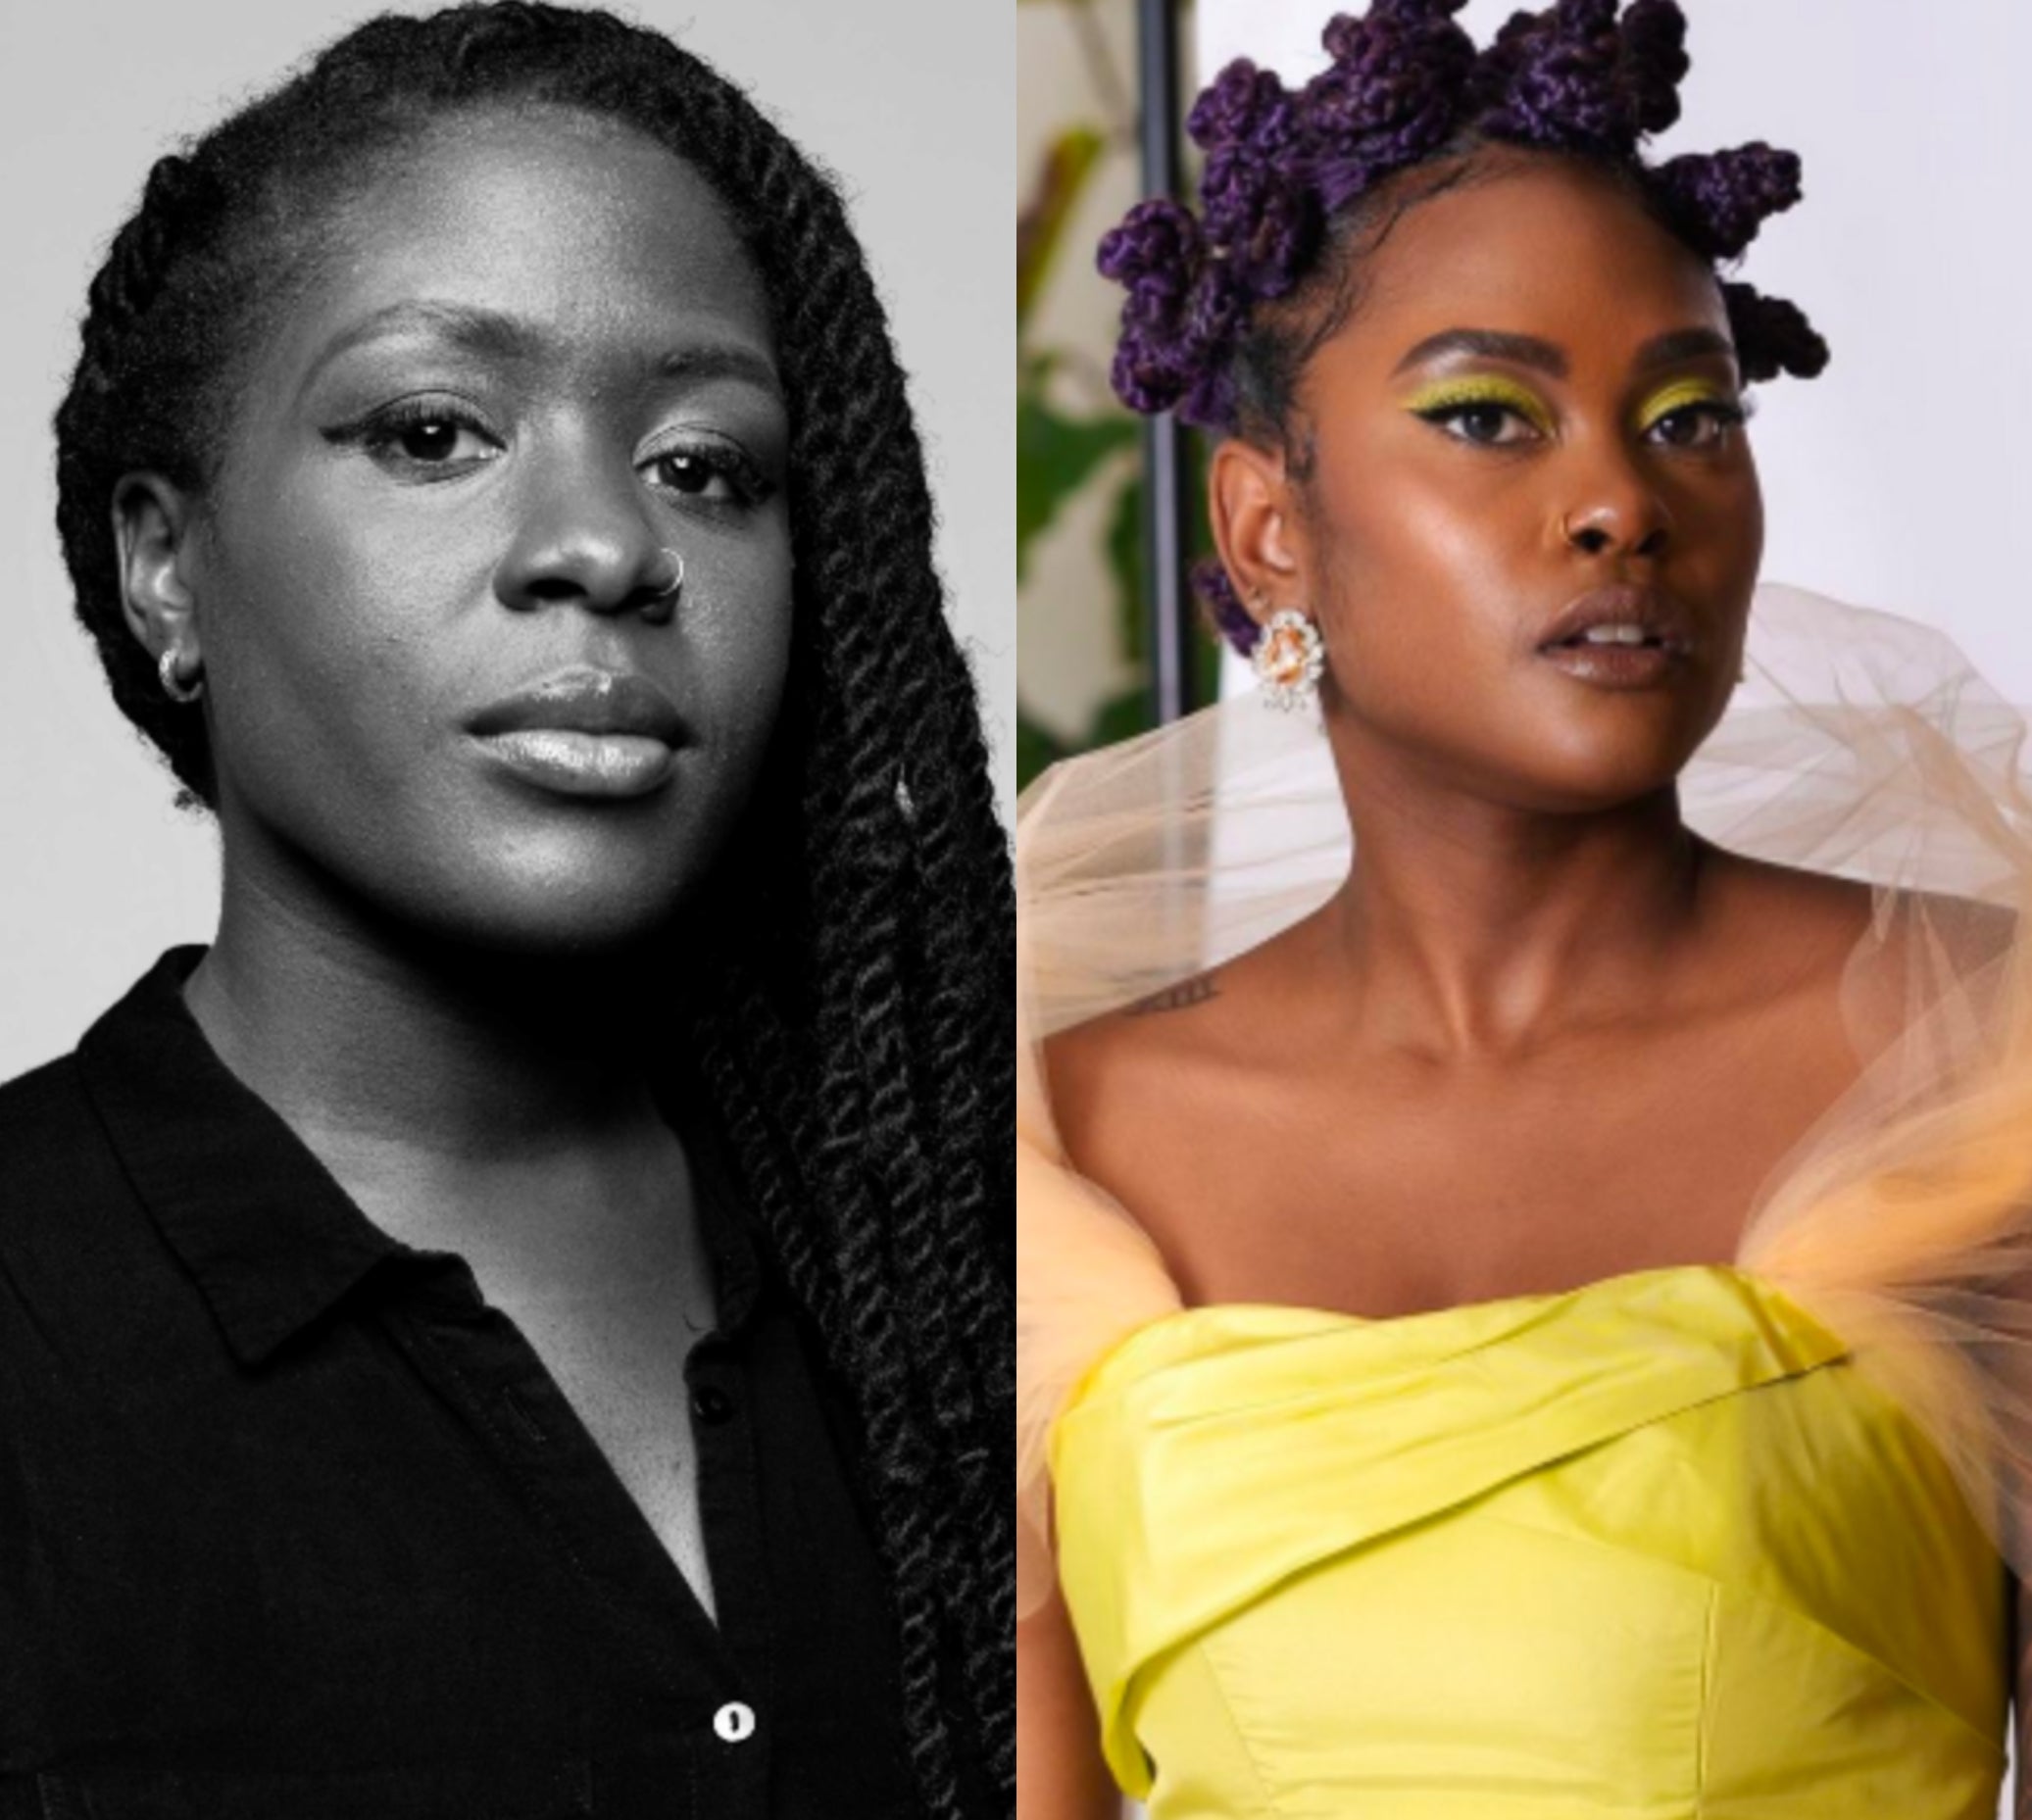 A Day In The Life Of Two Talented Black Women Working Behind The Scenes In Hollywood